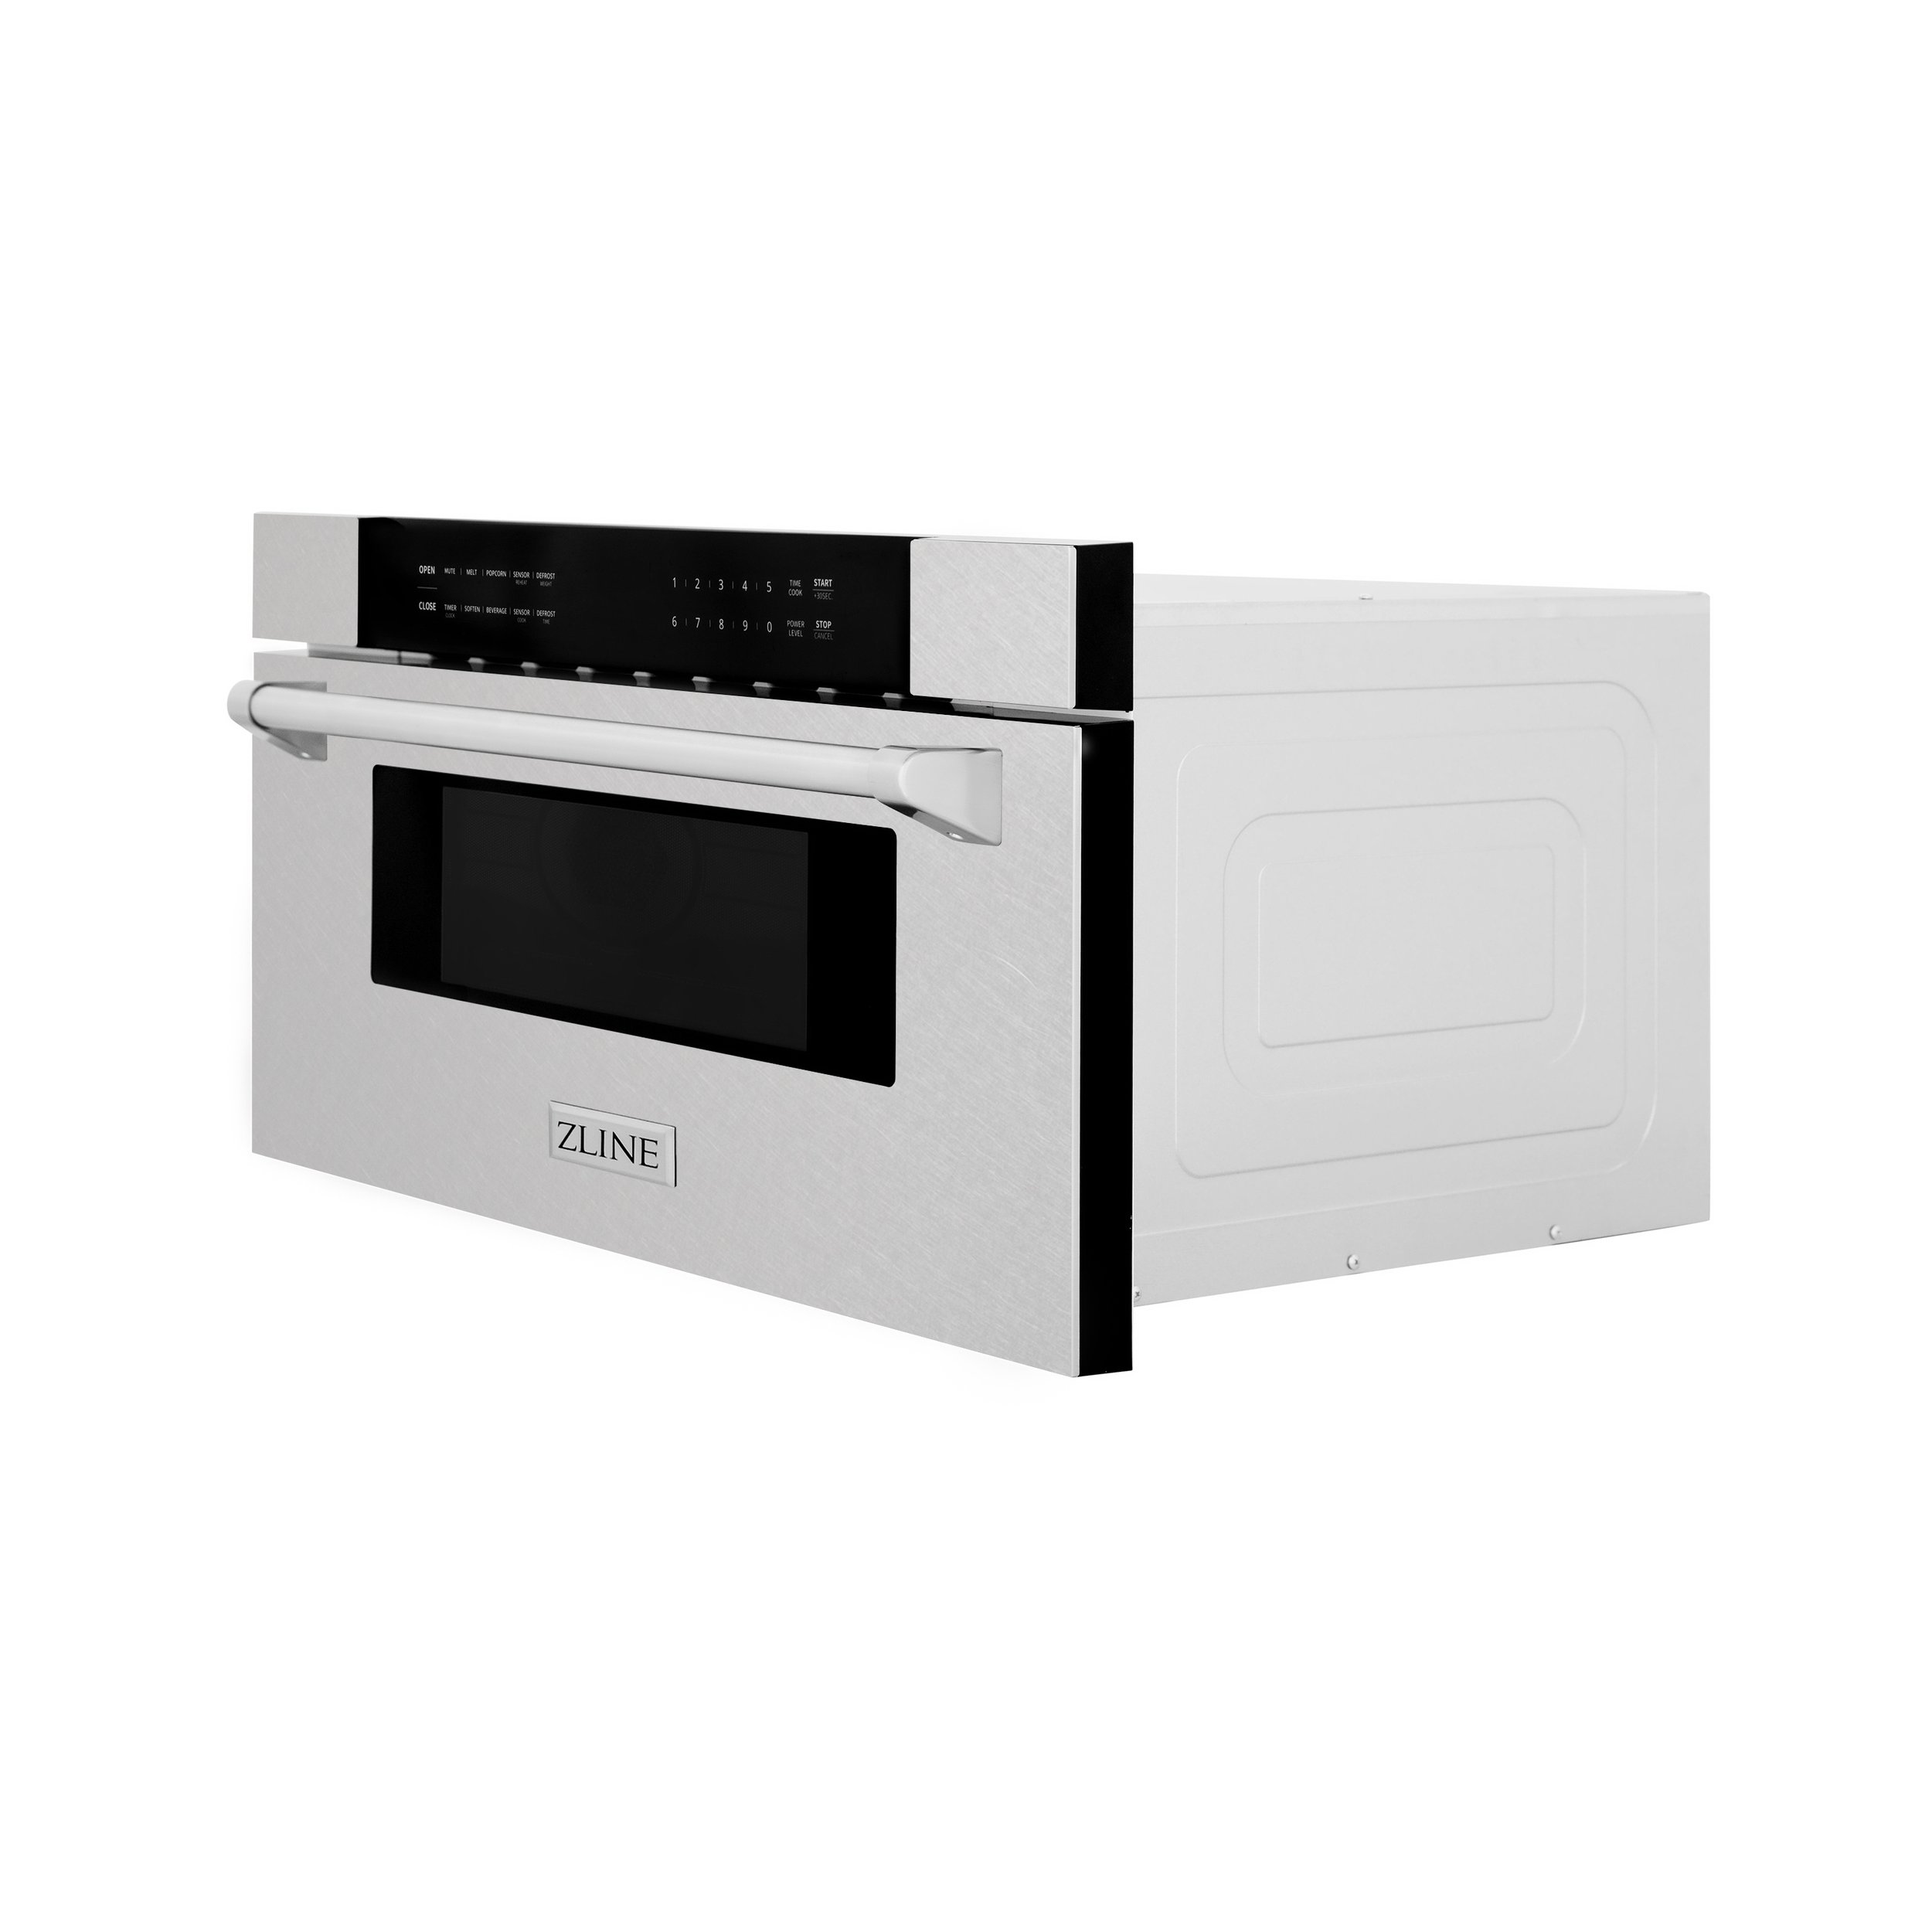 Drawer Microwave Oven